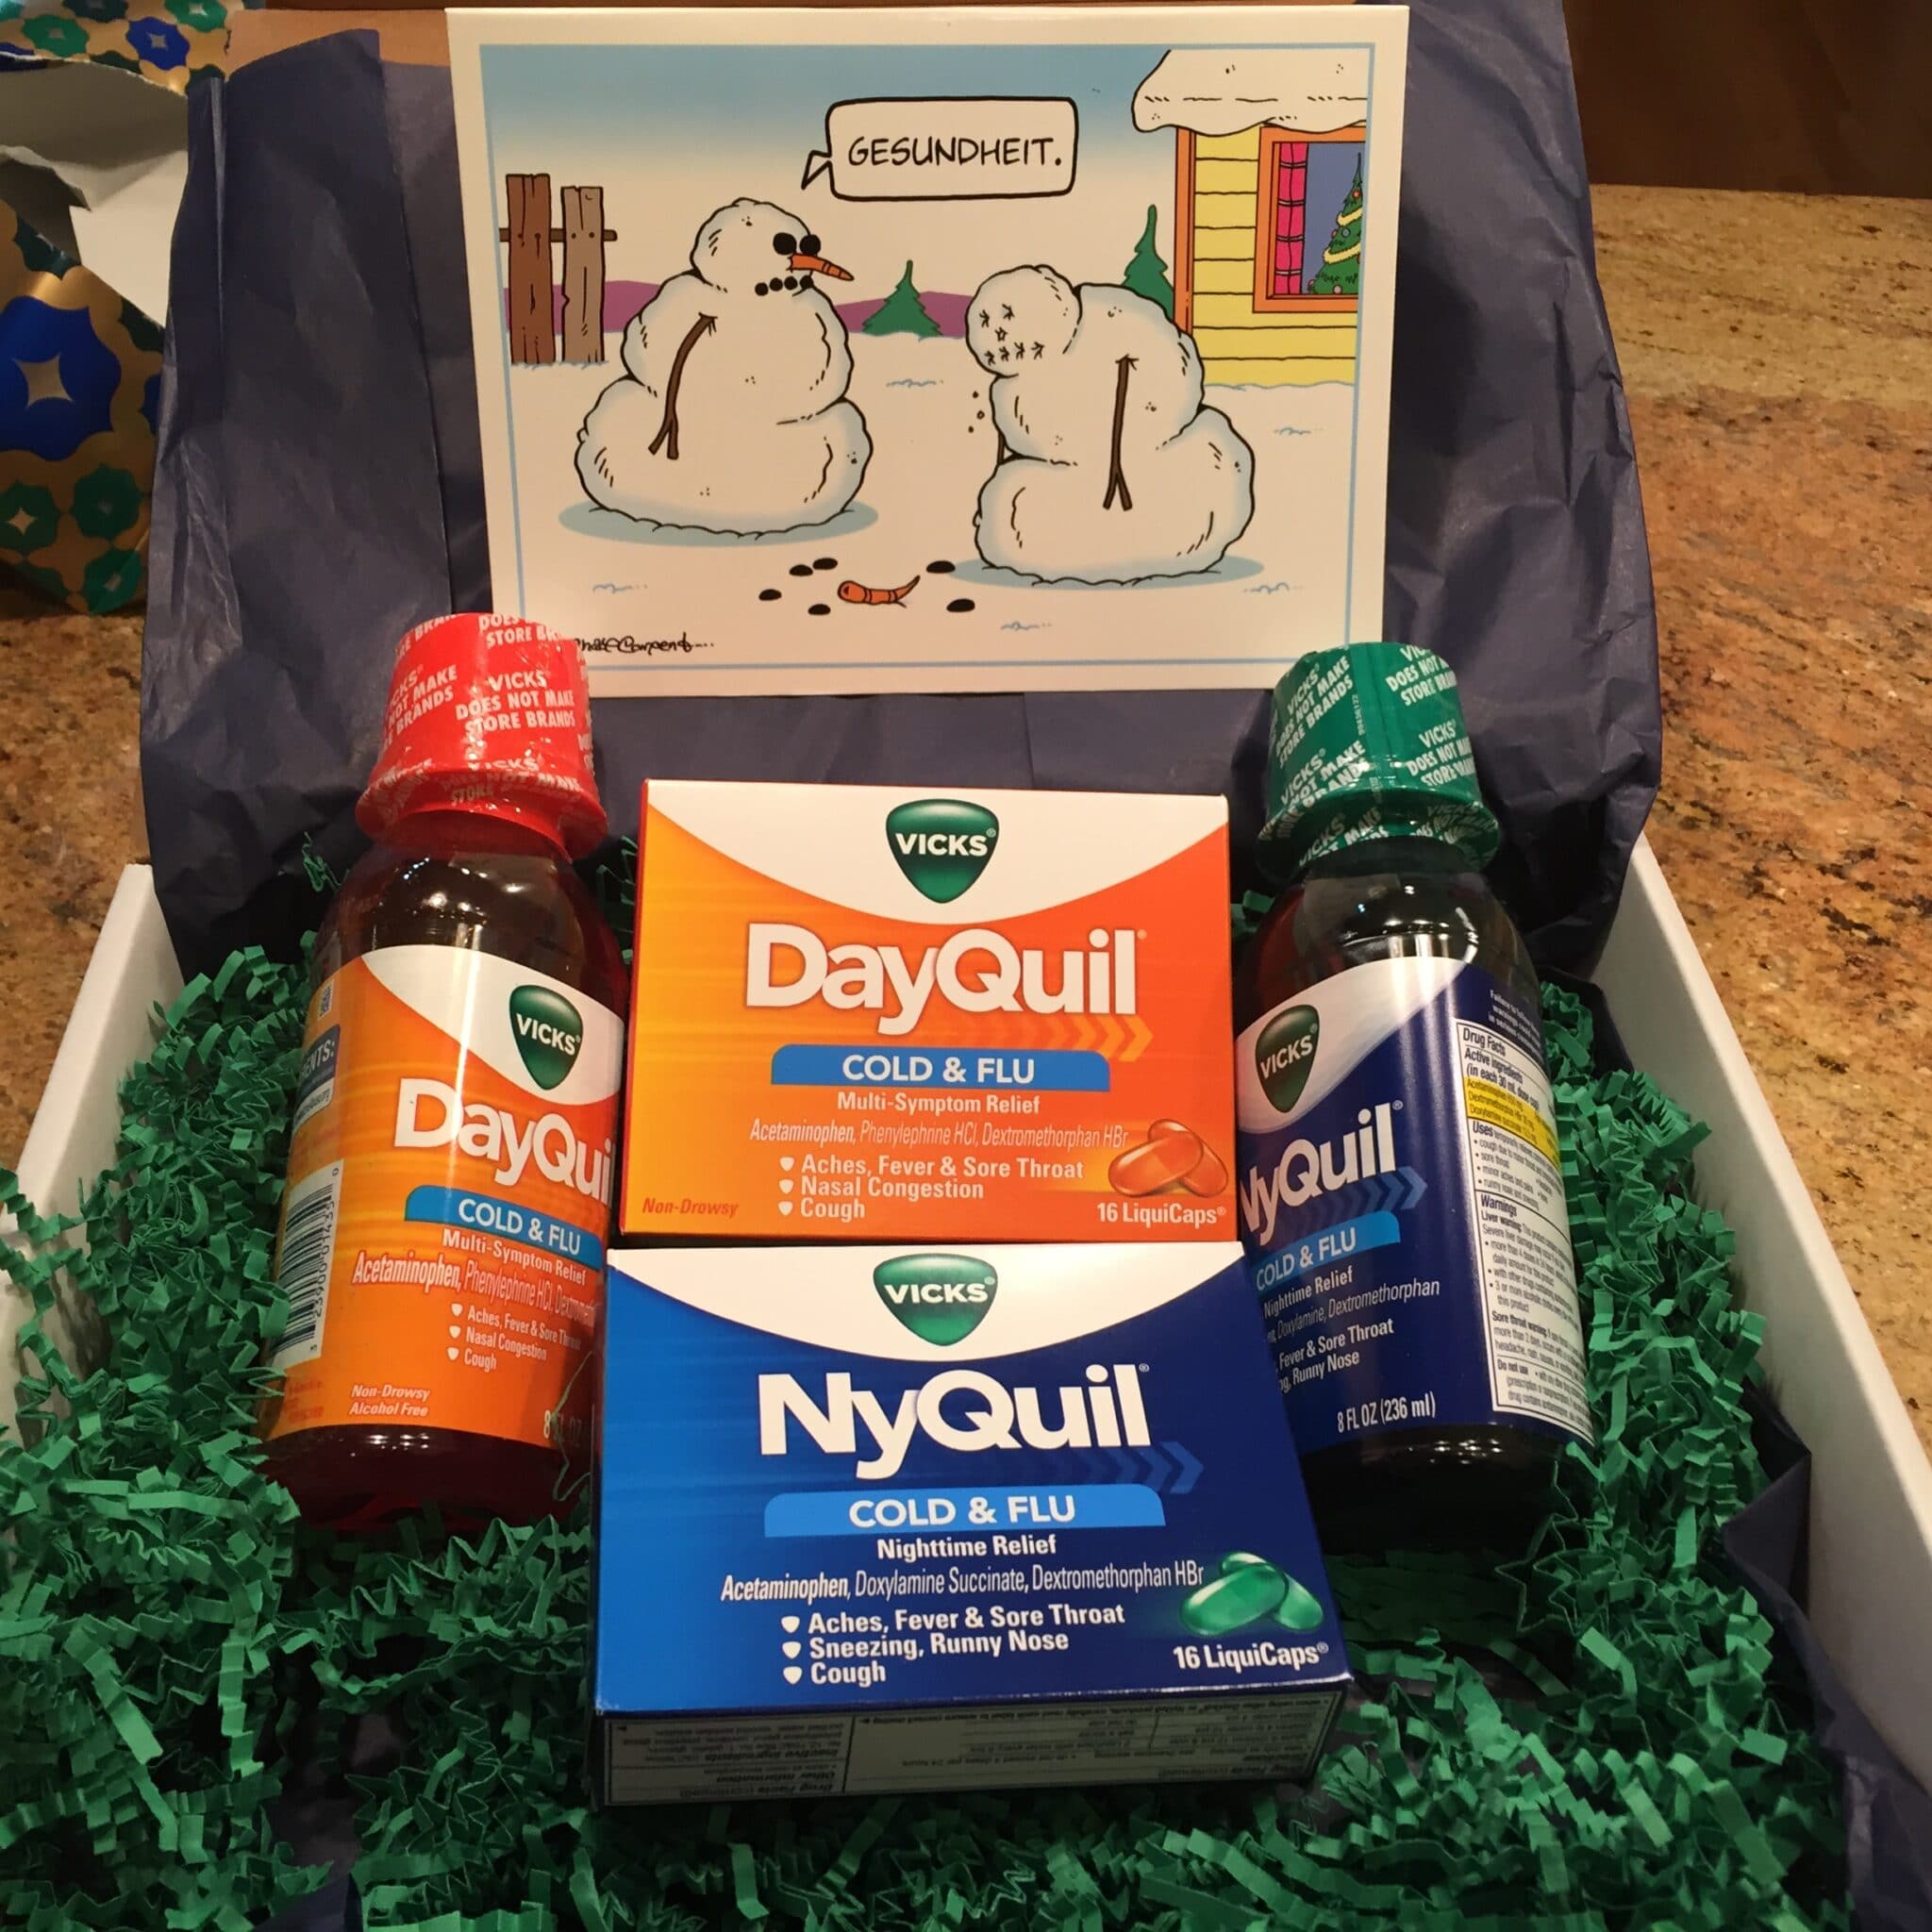 Vicks Ambassador #NyQuil #DayQuil